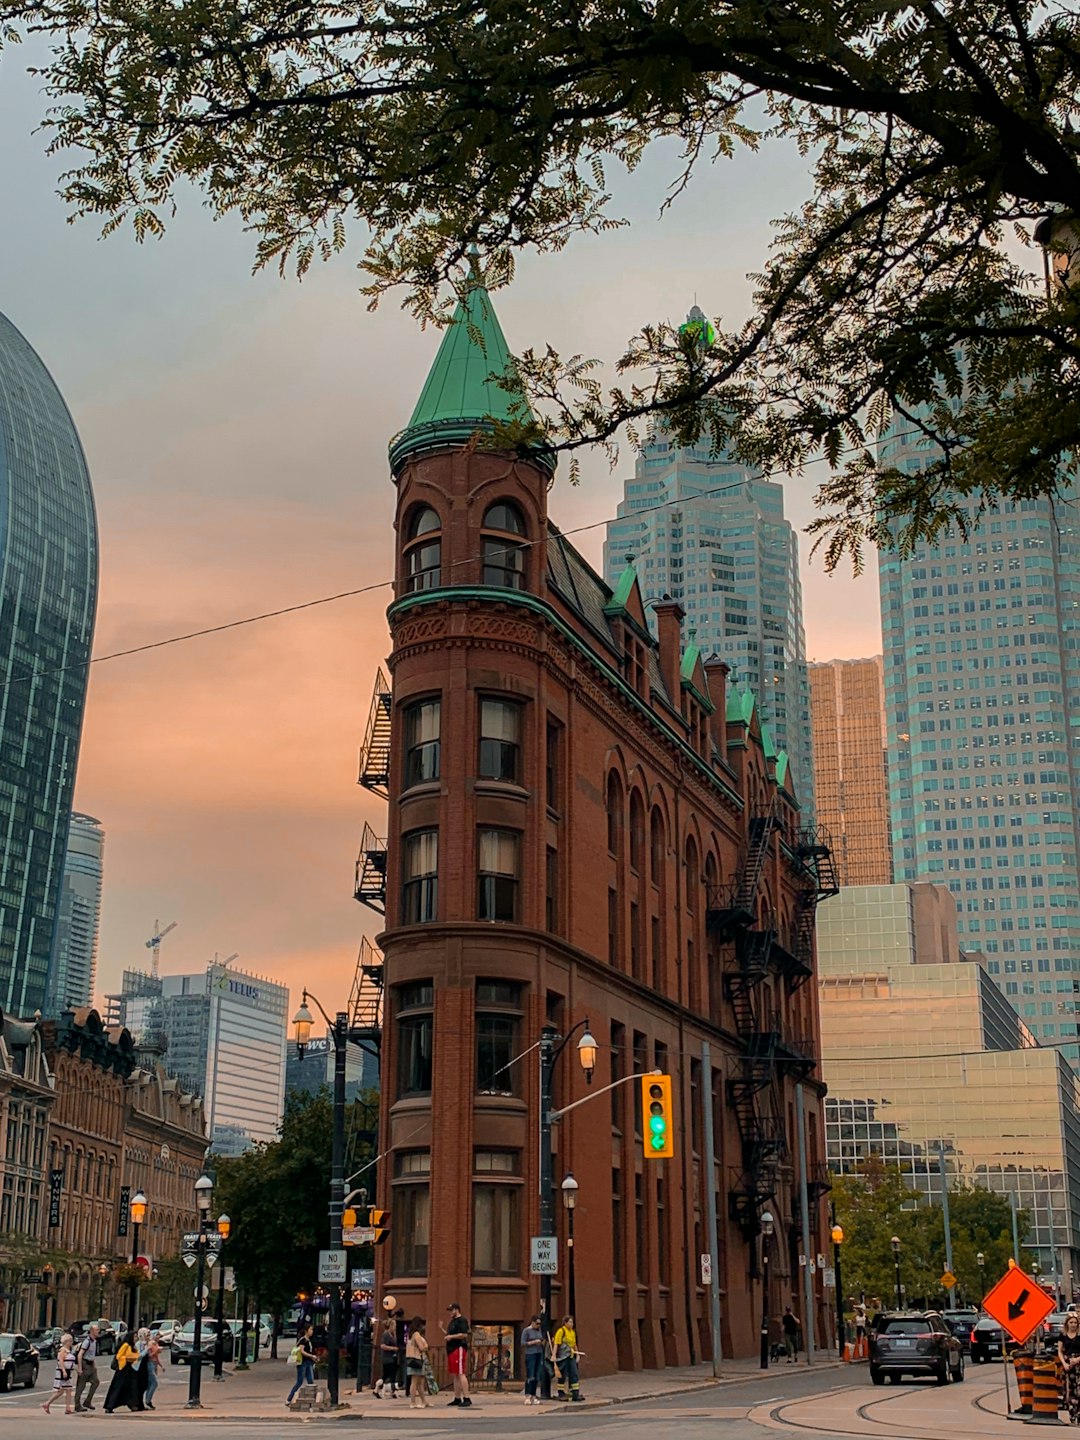 Travel Tips and Stories of Gooderham in Canada